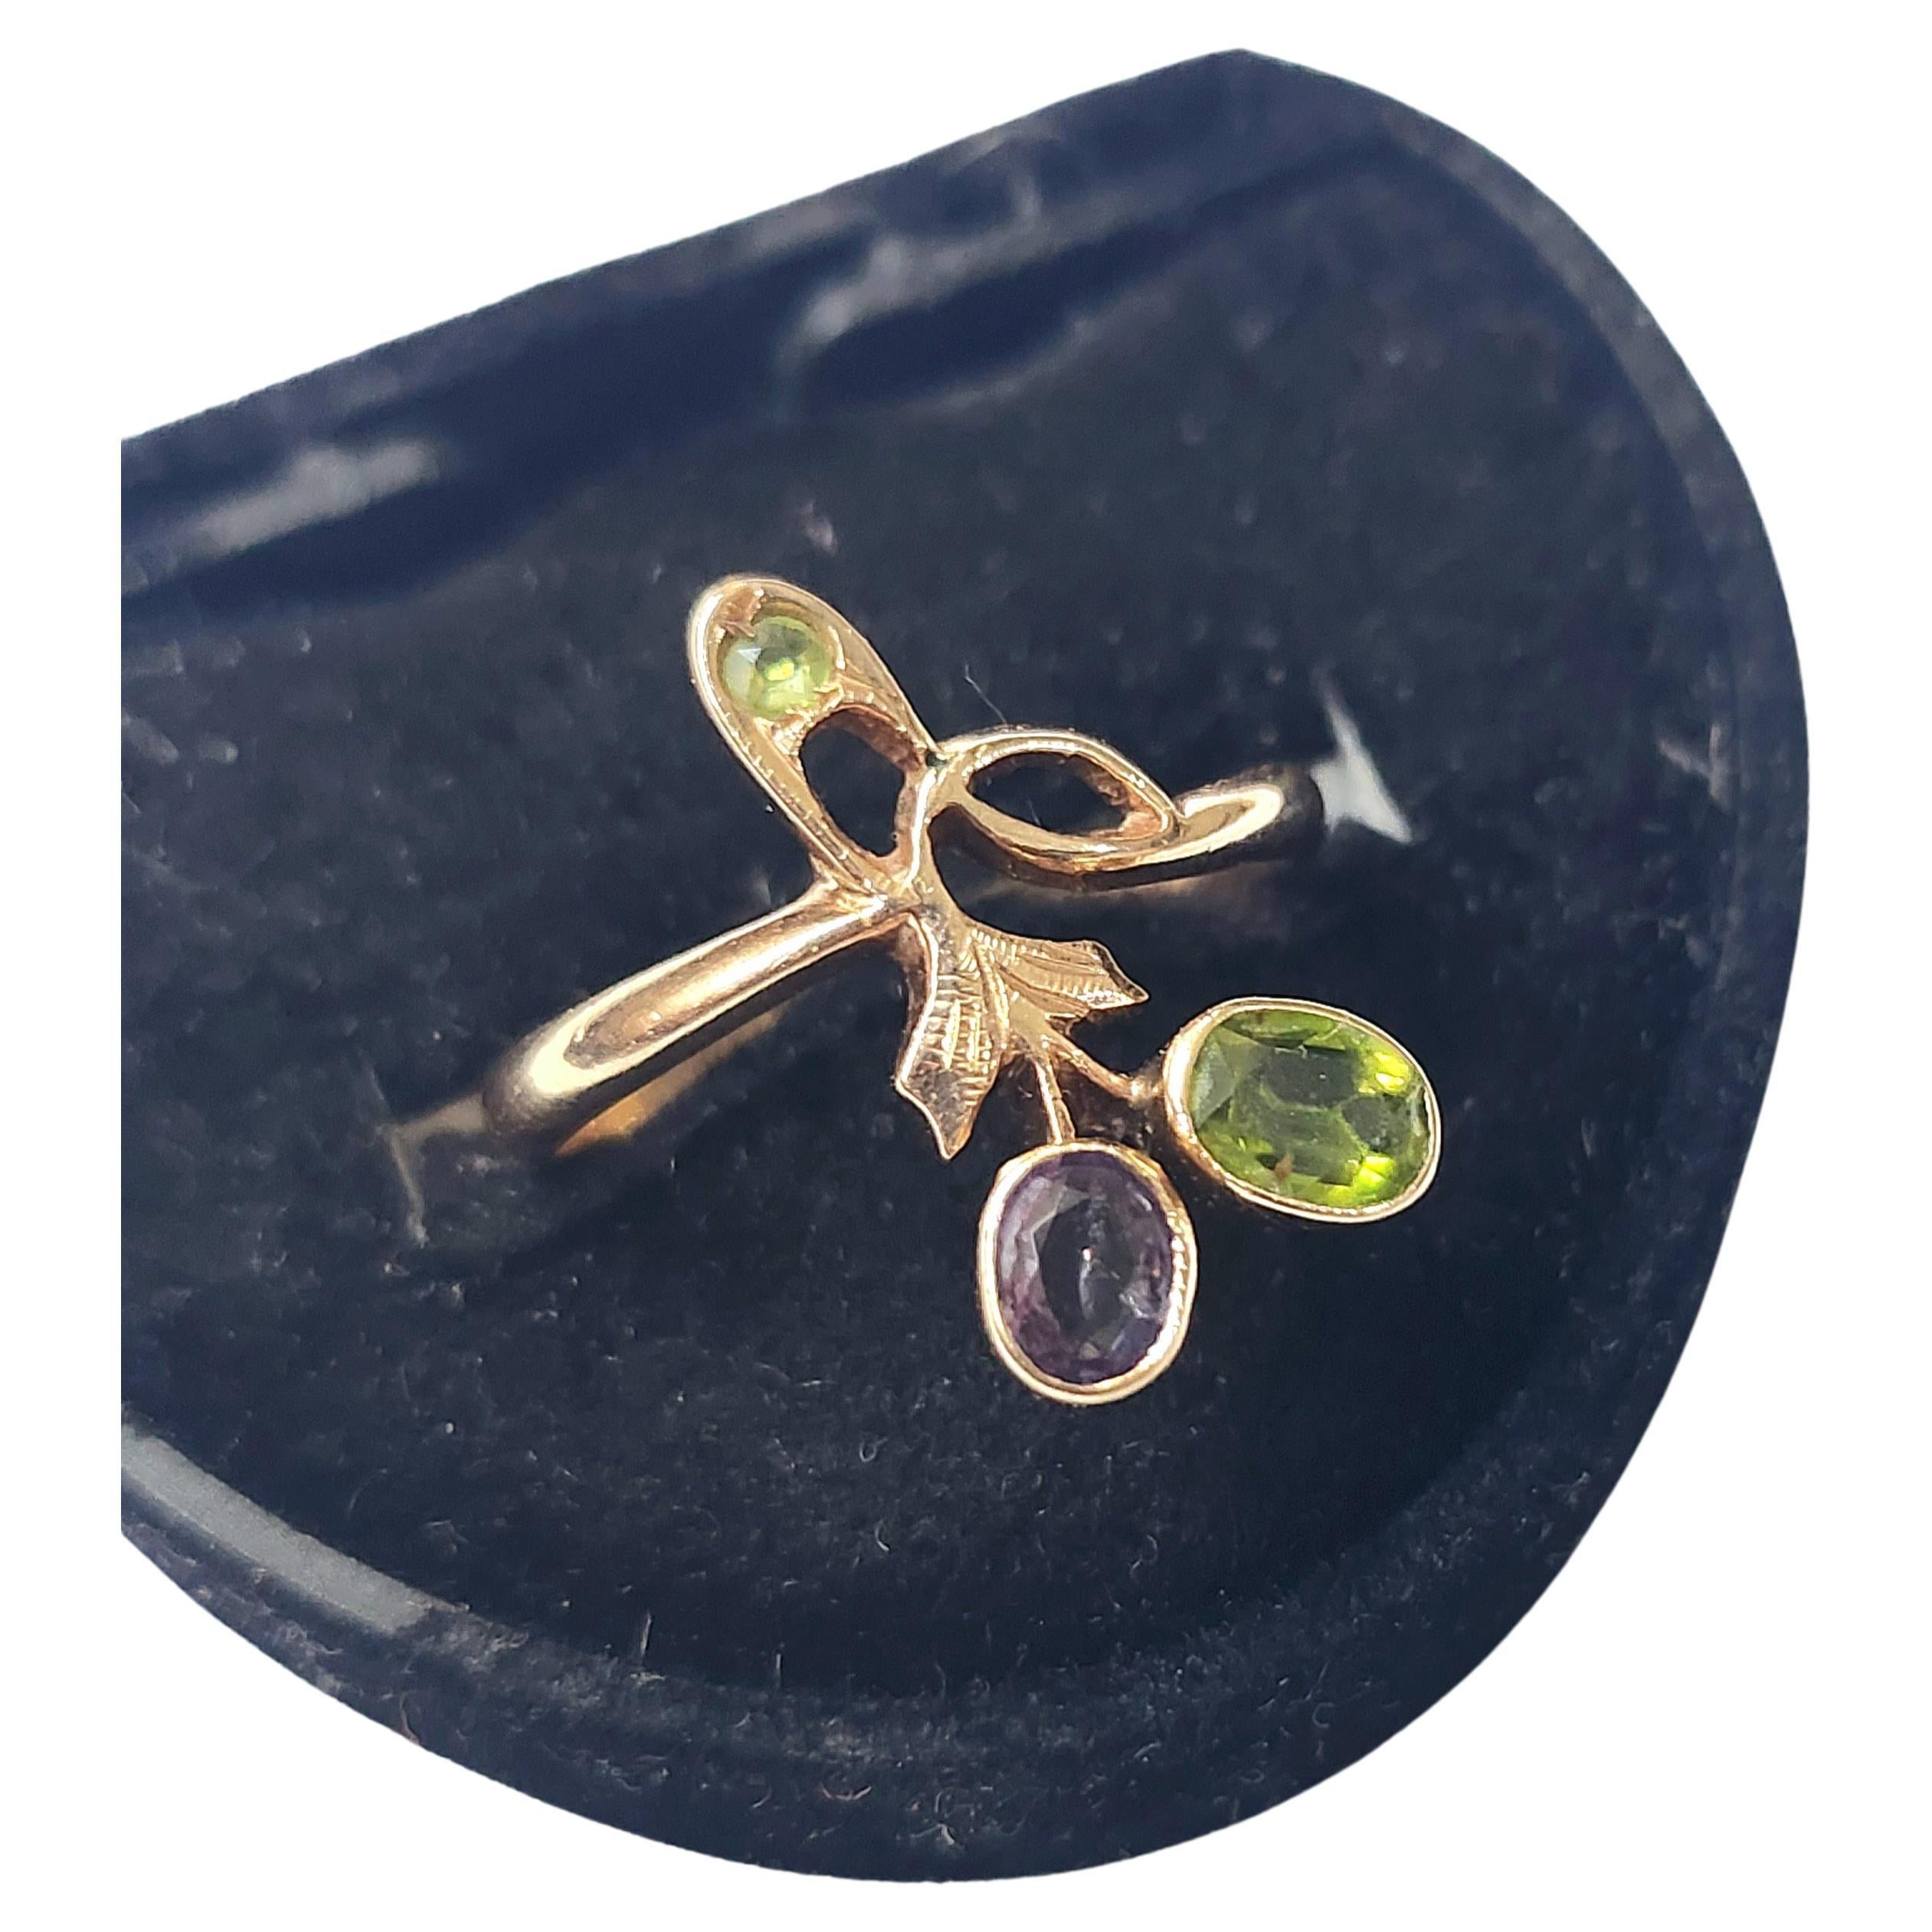 Vintage soviet union era 1940s gold ring with 1 oval green demantoid messurments 5.3mm×3.9mm and 1 oval alexandrite stone messurments 3.5mm×4.3mm in 14k gold hall marked 583 soviet gold control mark and initial maker mark 